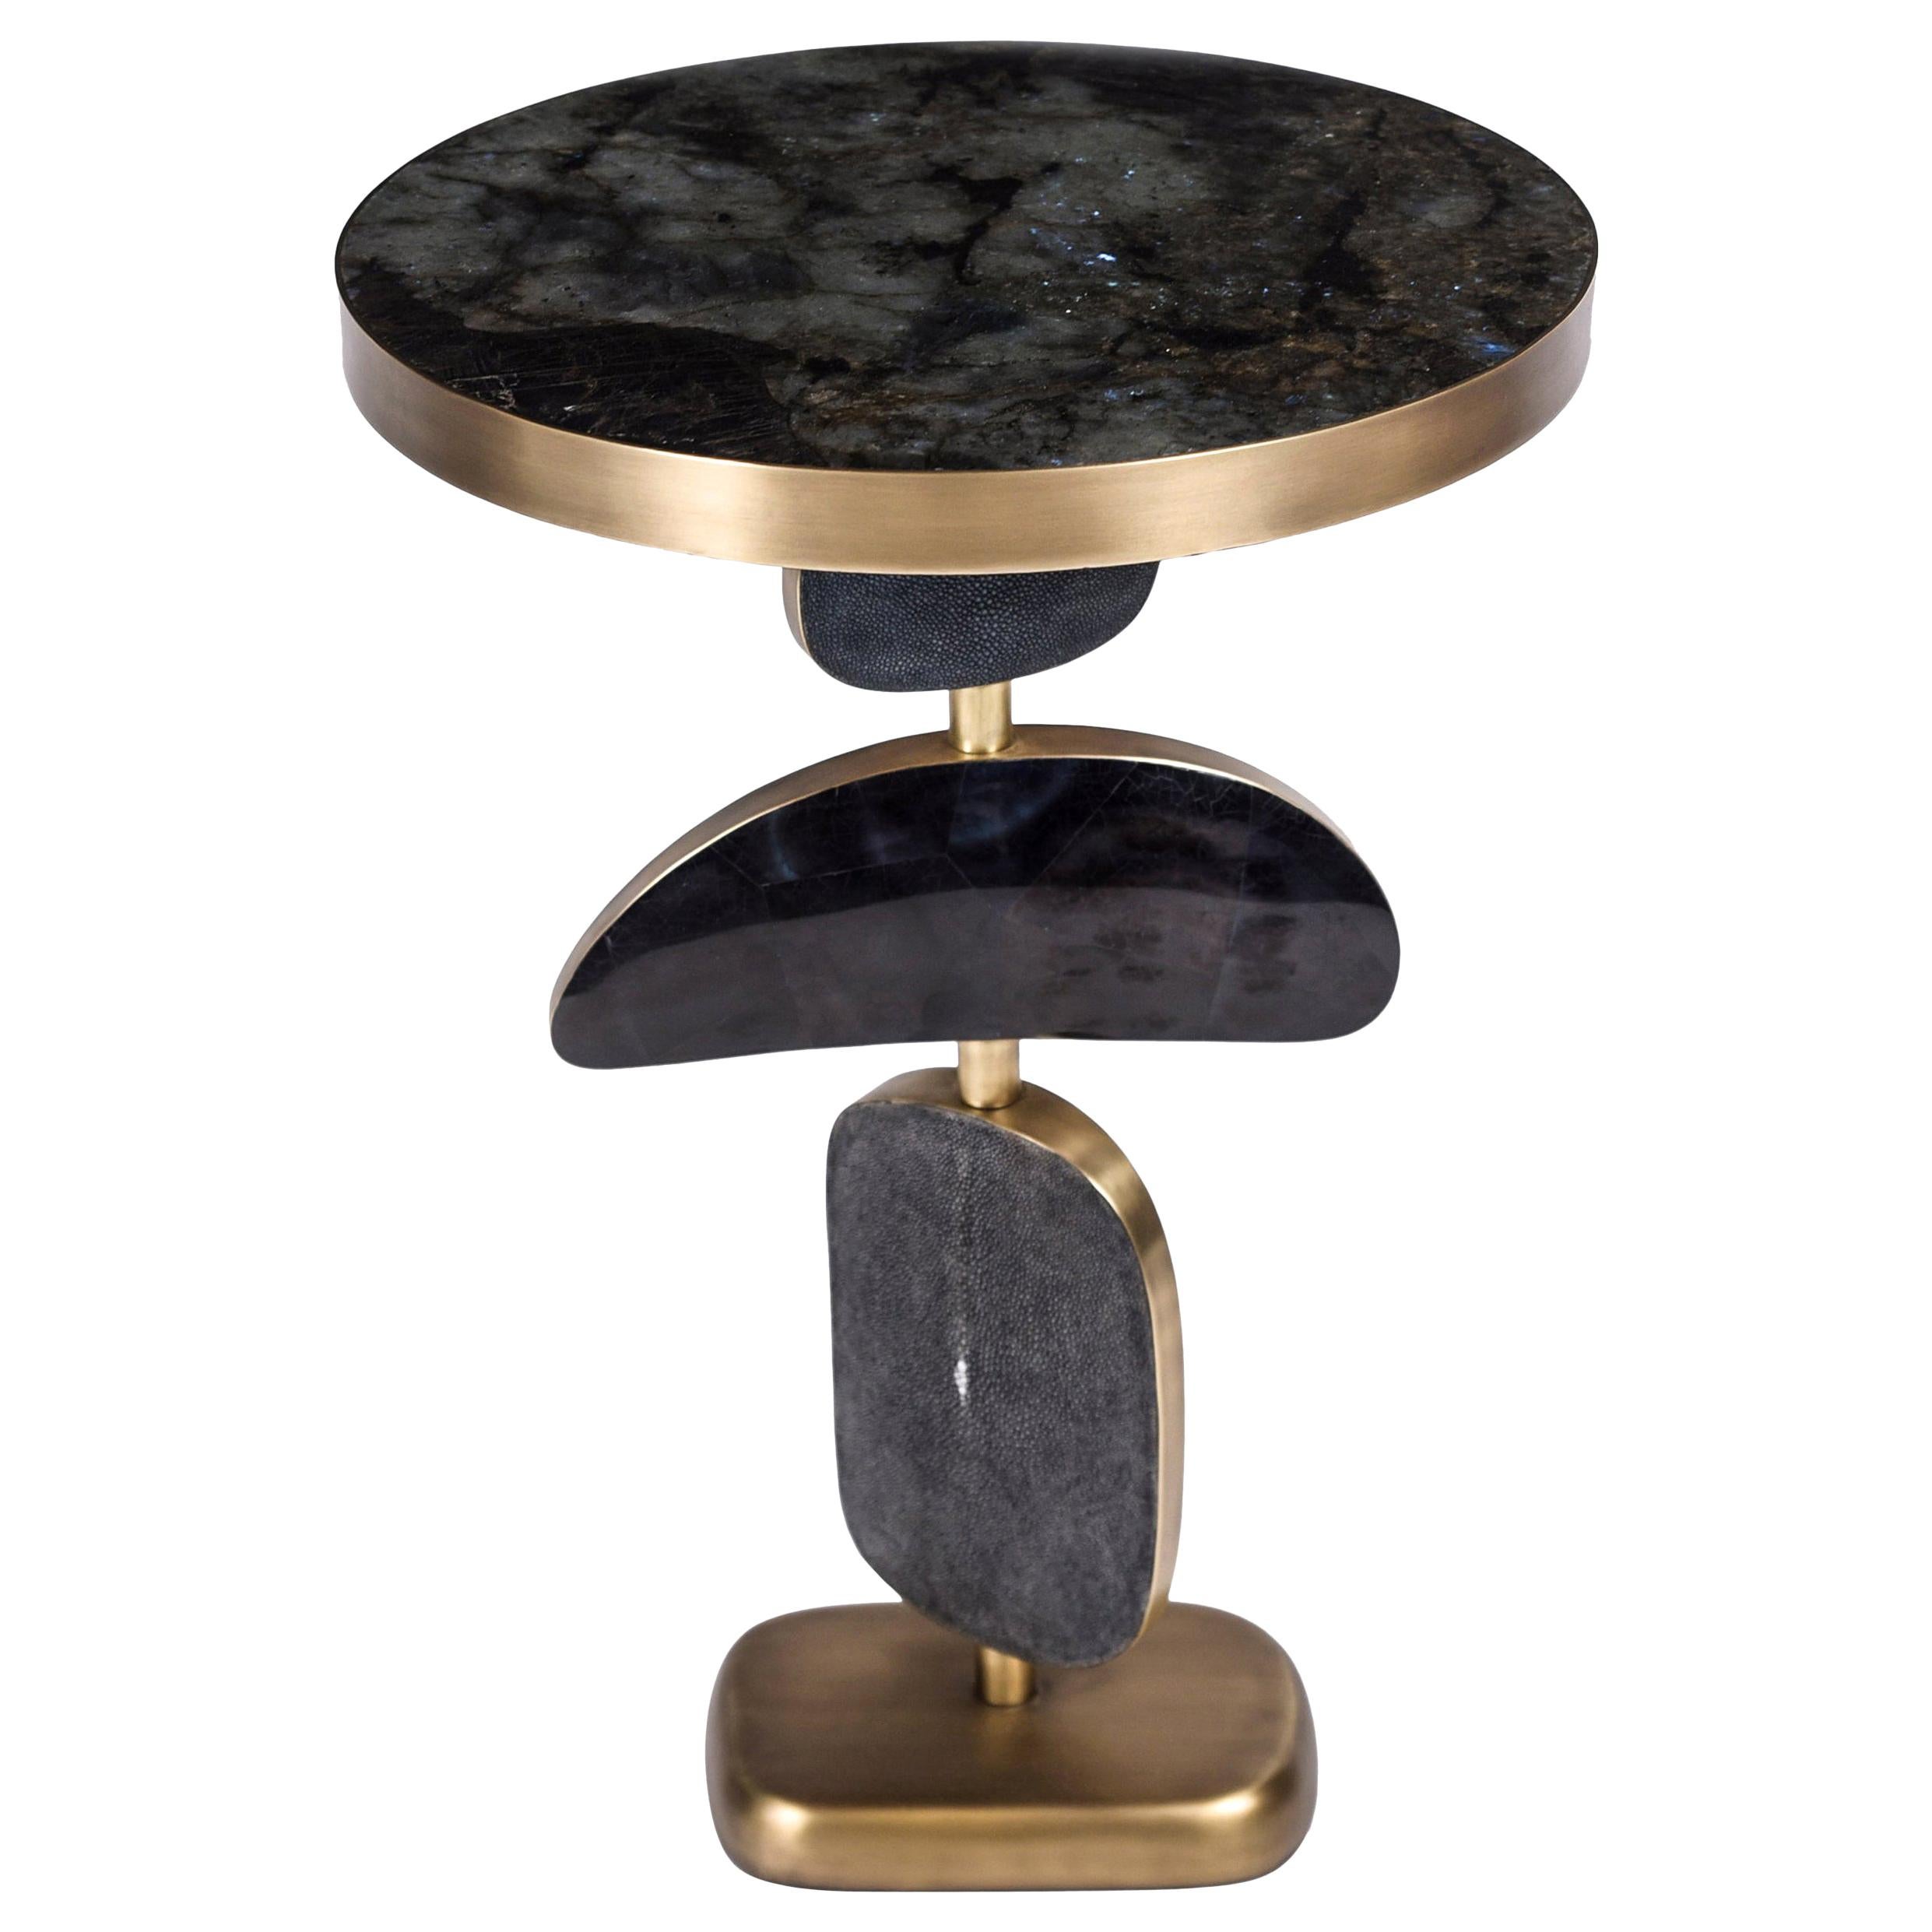 Shagreen Side Table with Mobile Sculptural Parts and Brass Accents by Kifu Paris